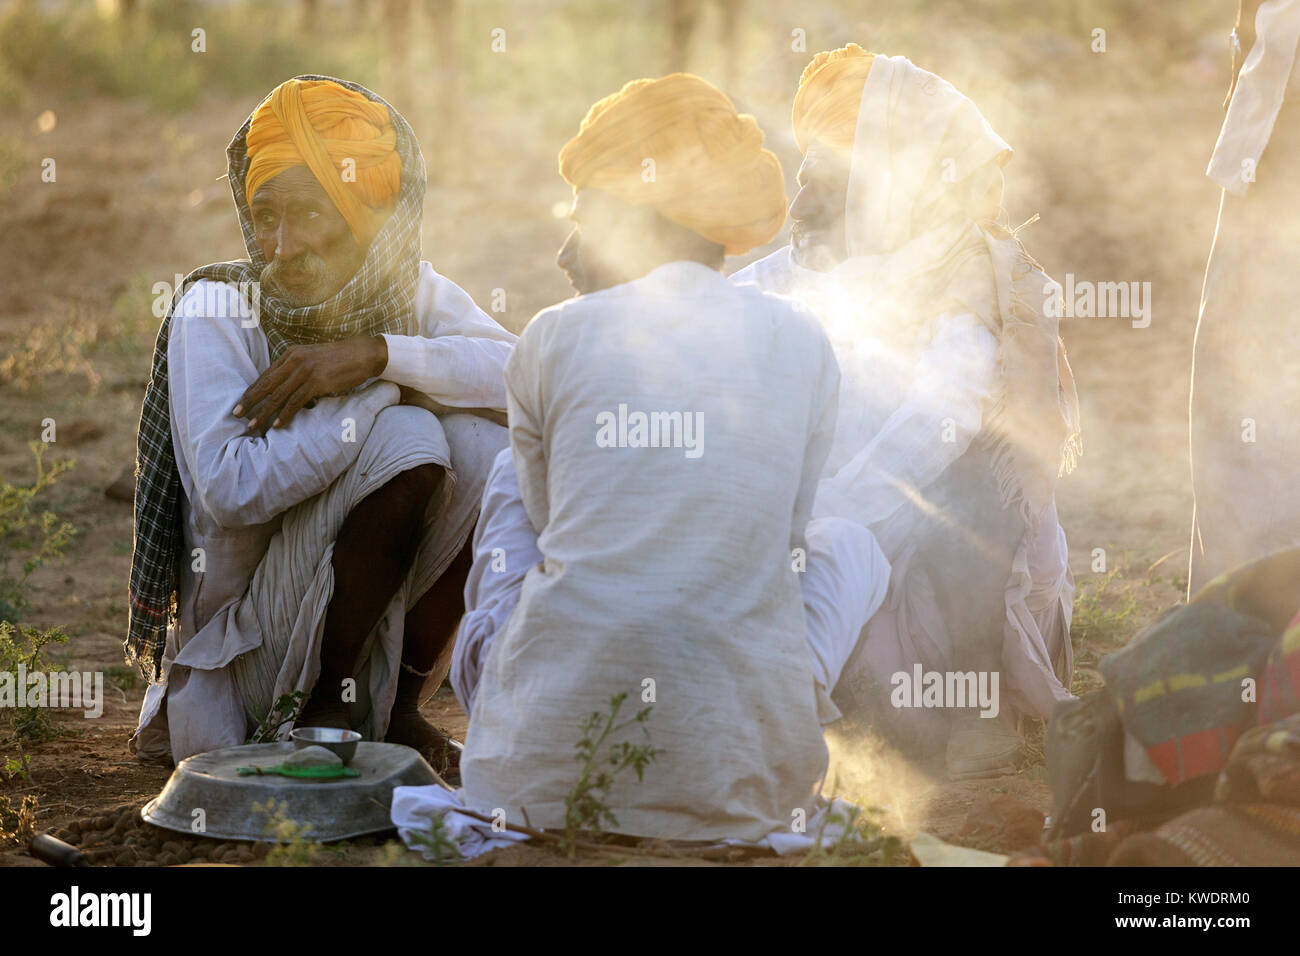 Three traders wearing orange turbans sitting by fireplace at the annual Pushkar Camel Fair, Rajasthan,India. Stock Photo